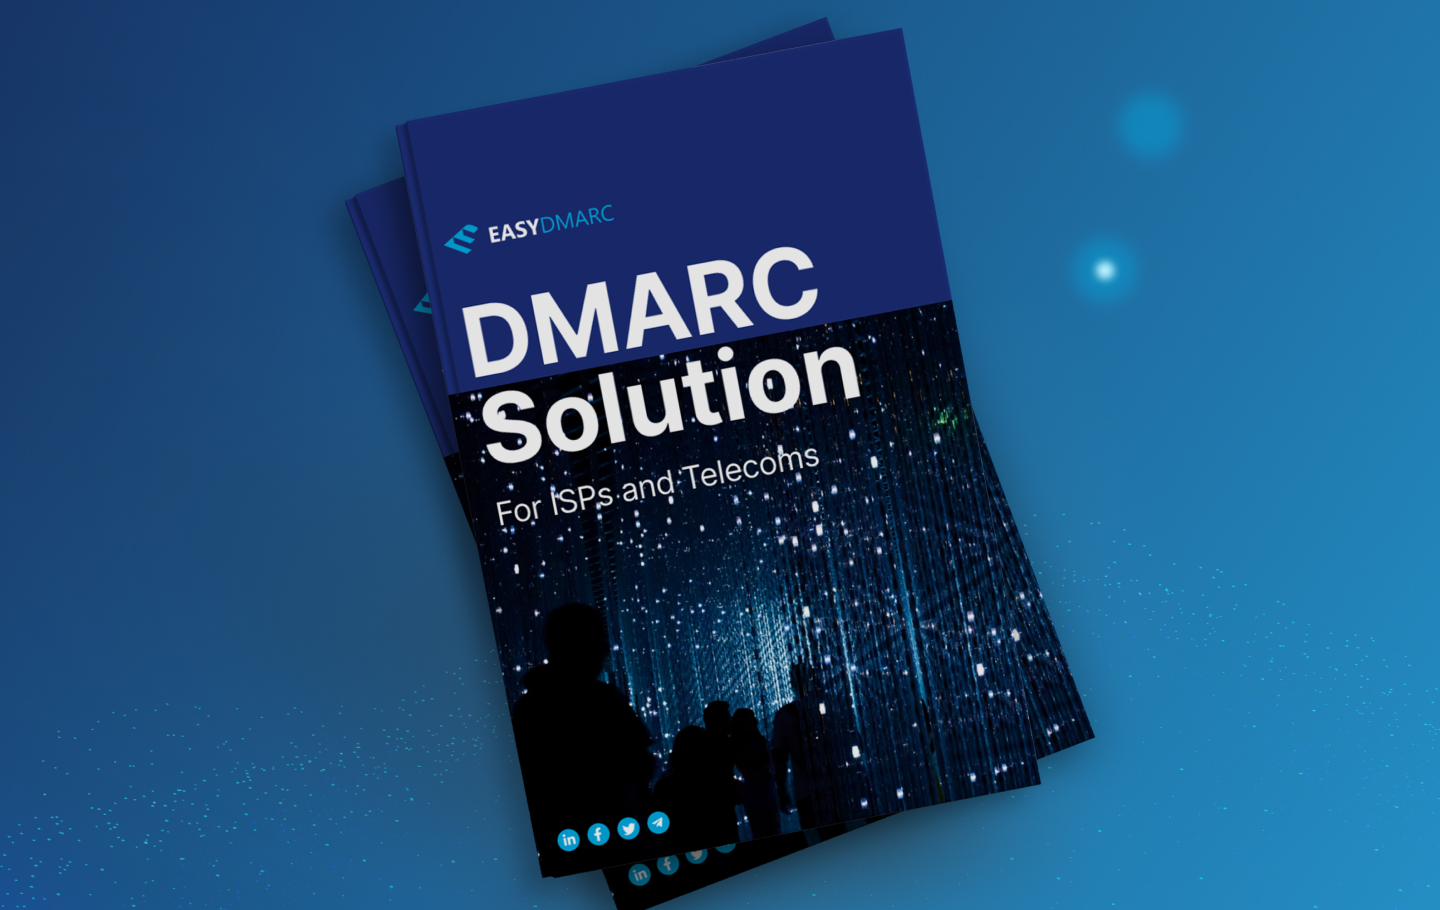 DMARC Security Guide For ISPs and Telecommunication Companies